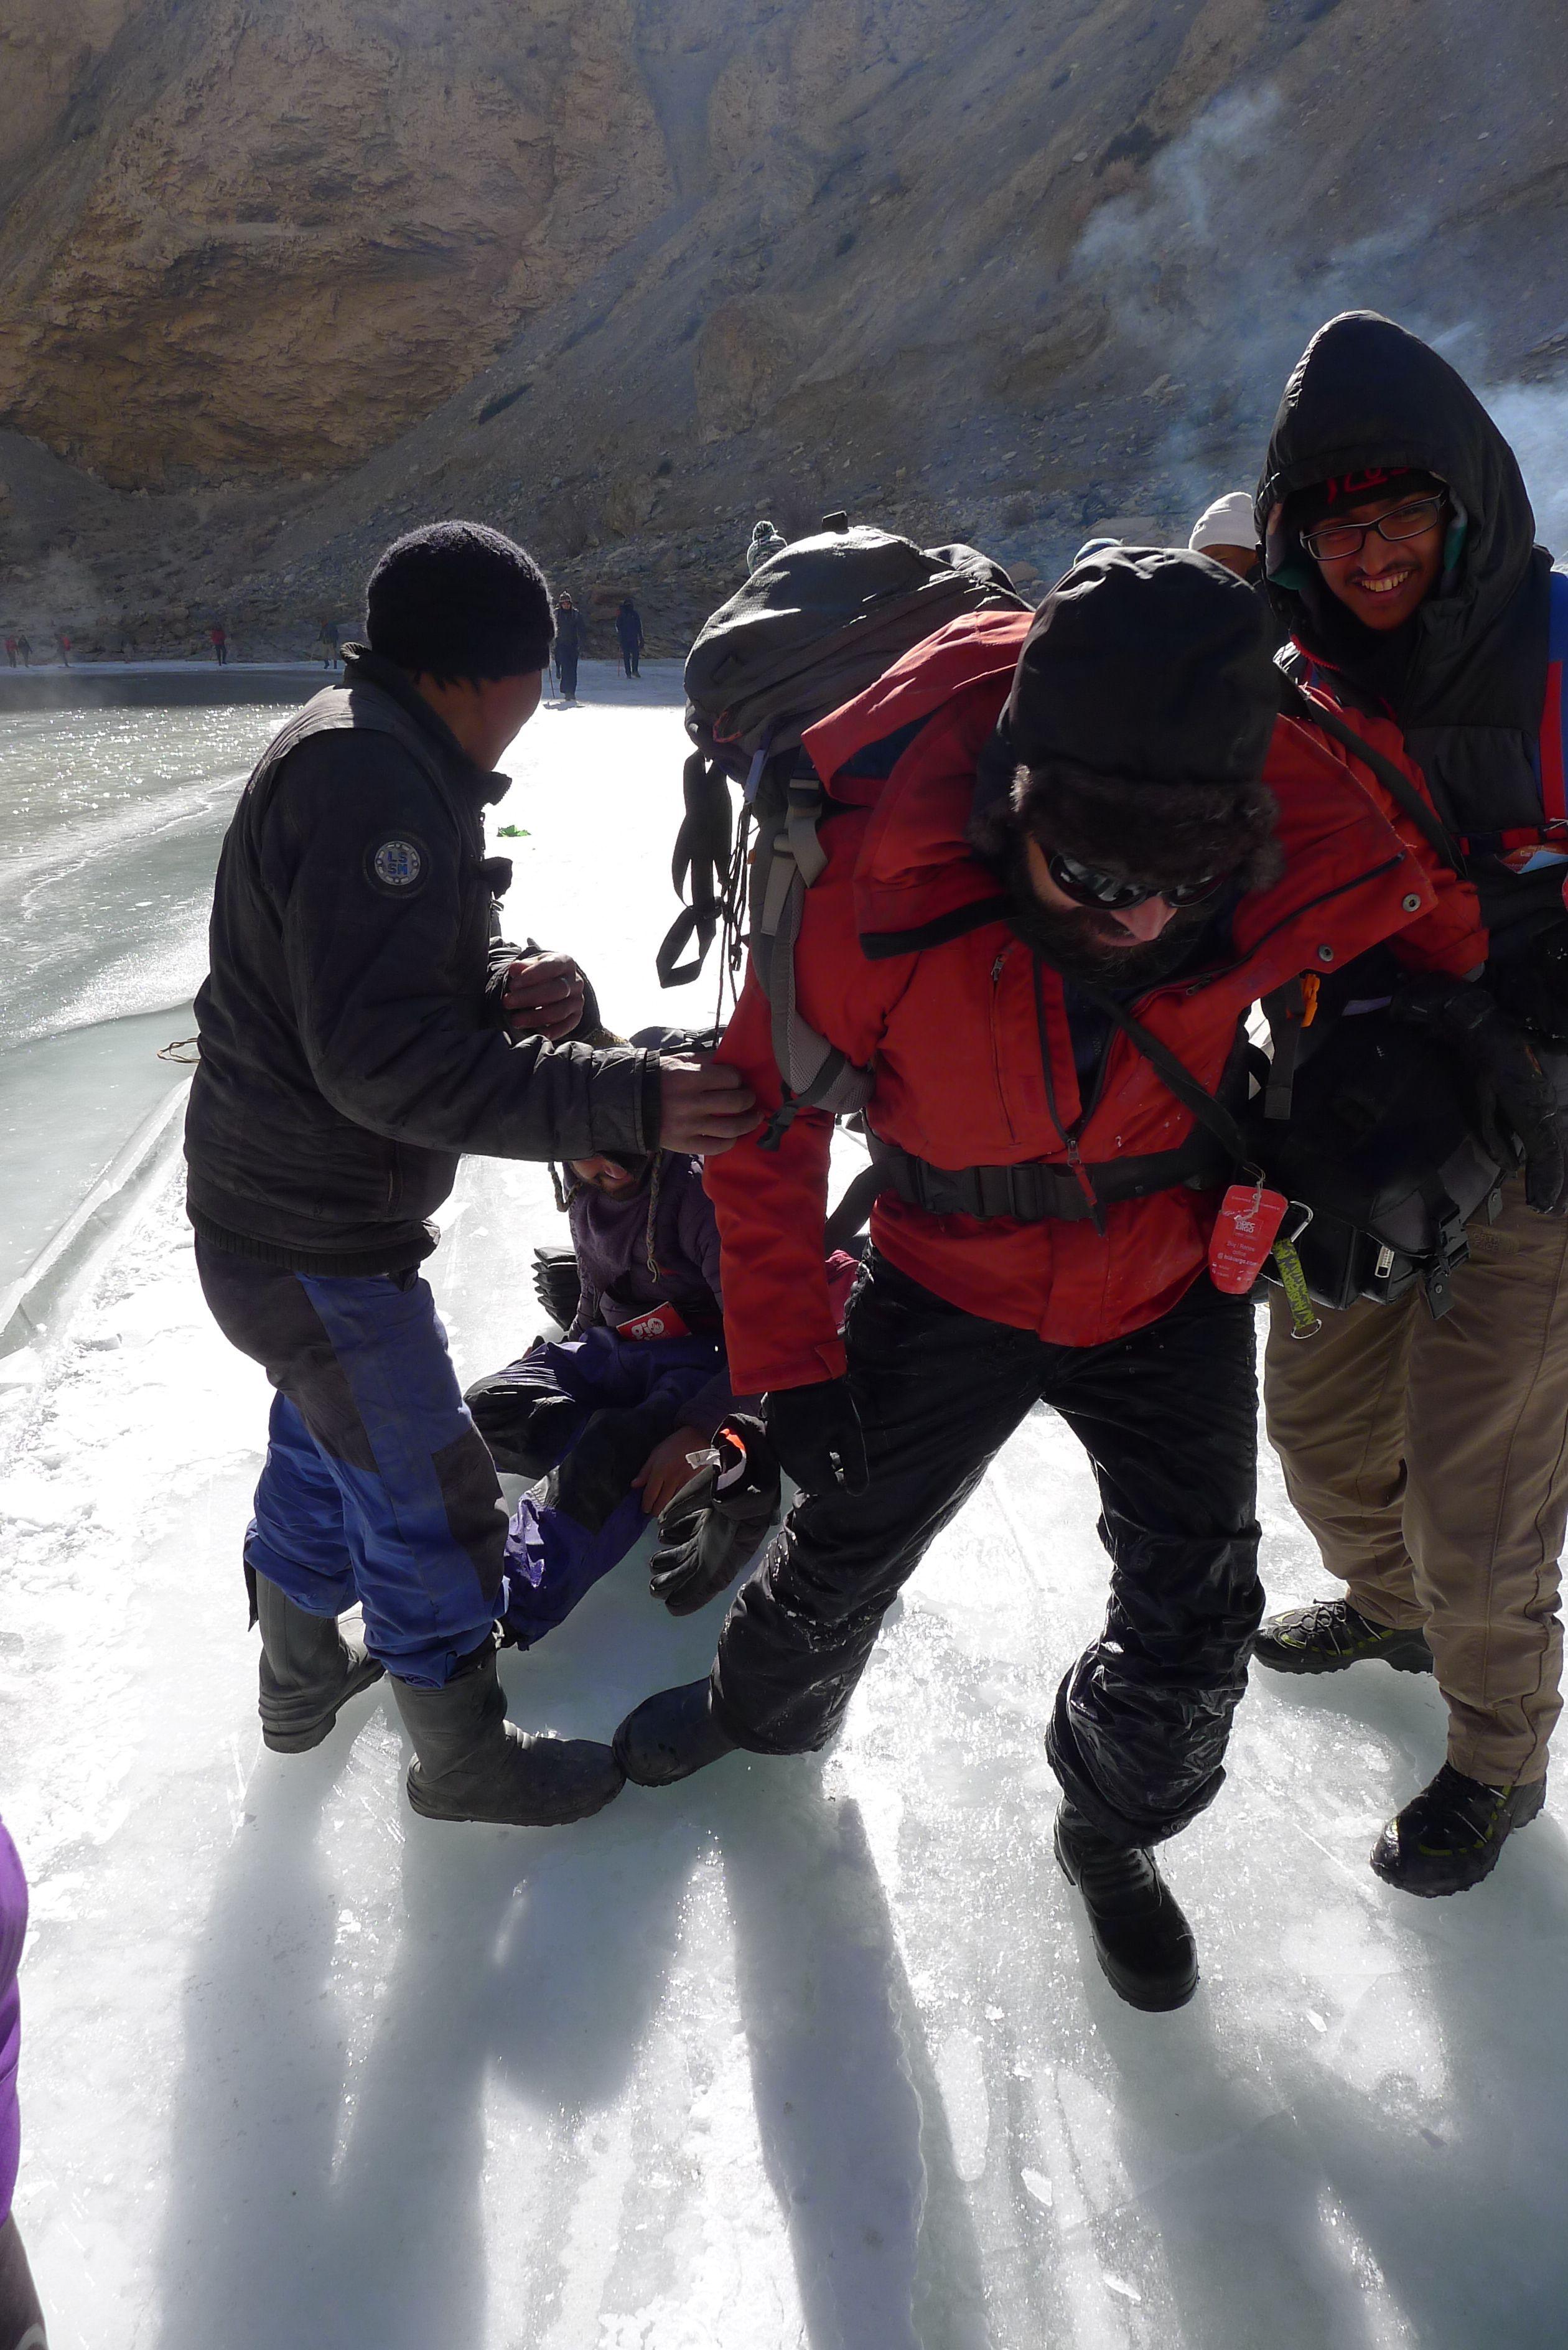 A member of our group pulled out of the water, after falling through the ice.